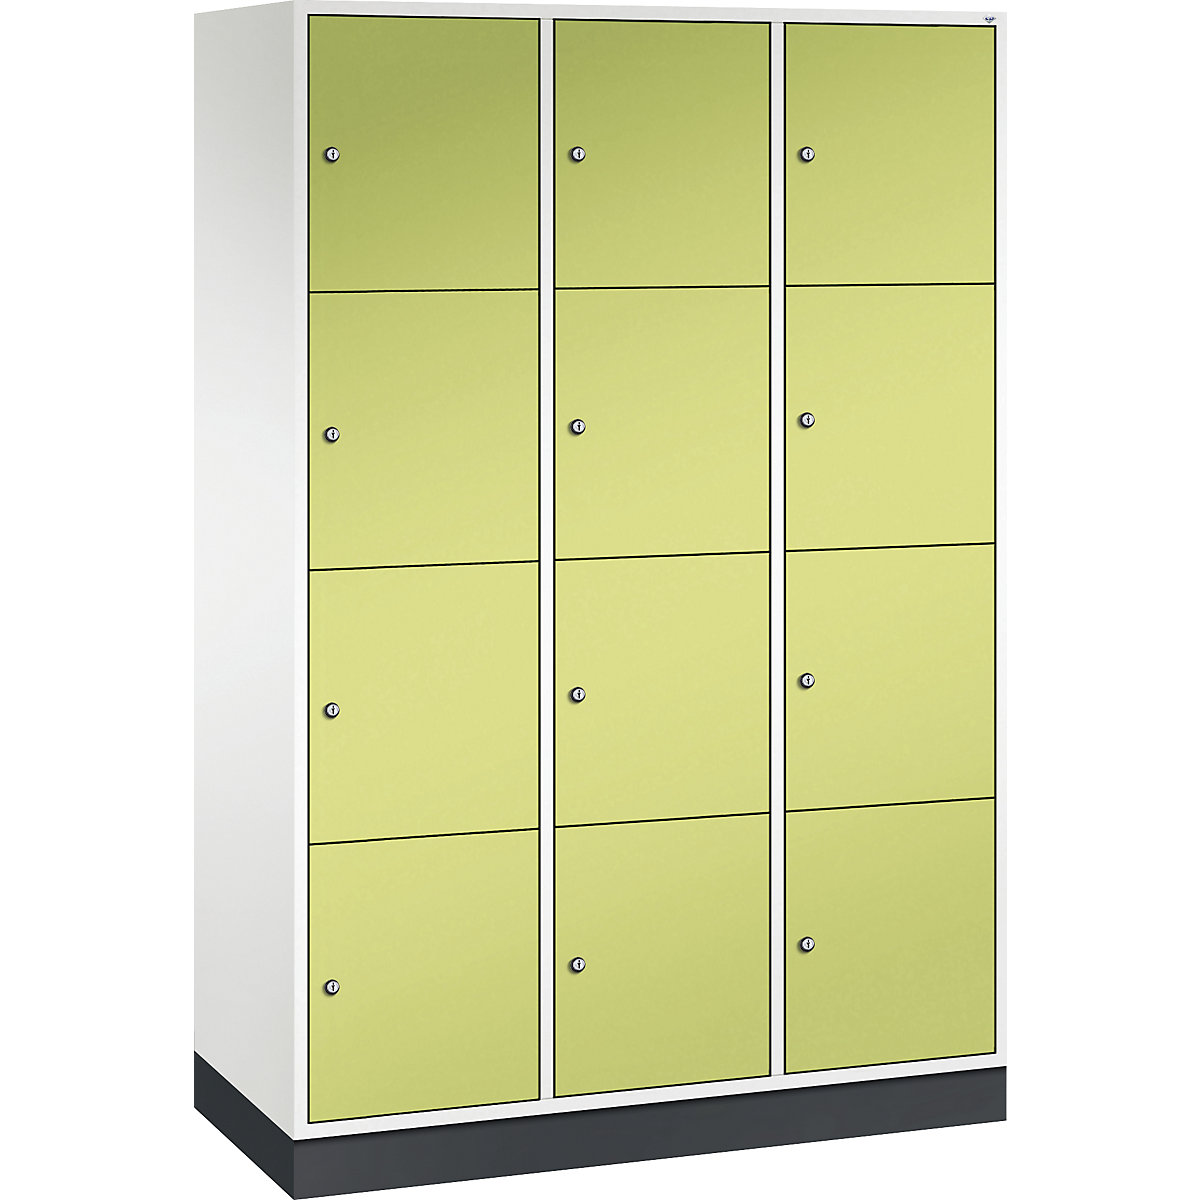 INTRO steel compartment locker, compartment height 435 mm – C+P, WxD 1220 x 500 mm, 12 compartments, pure white body, viridian green doors